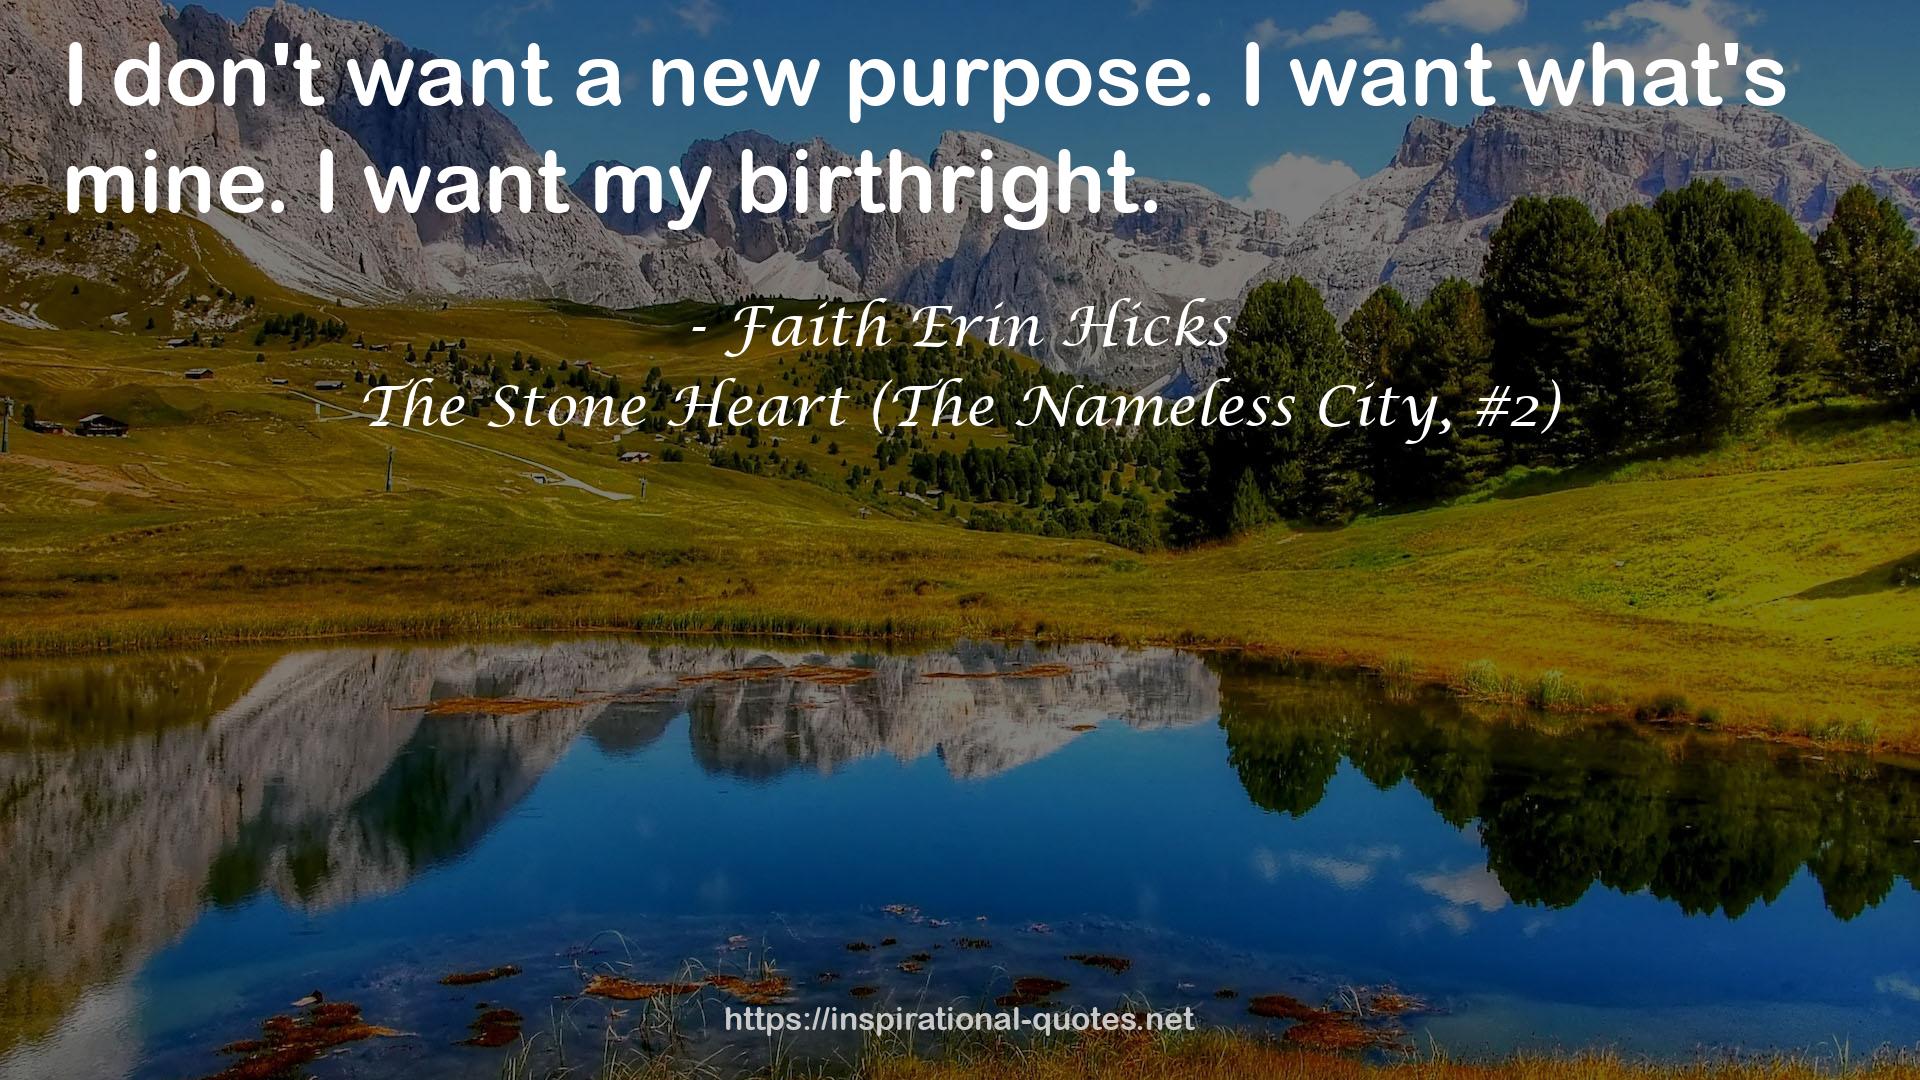 a new purpose  QUOTES